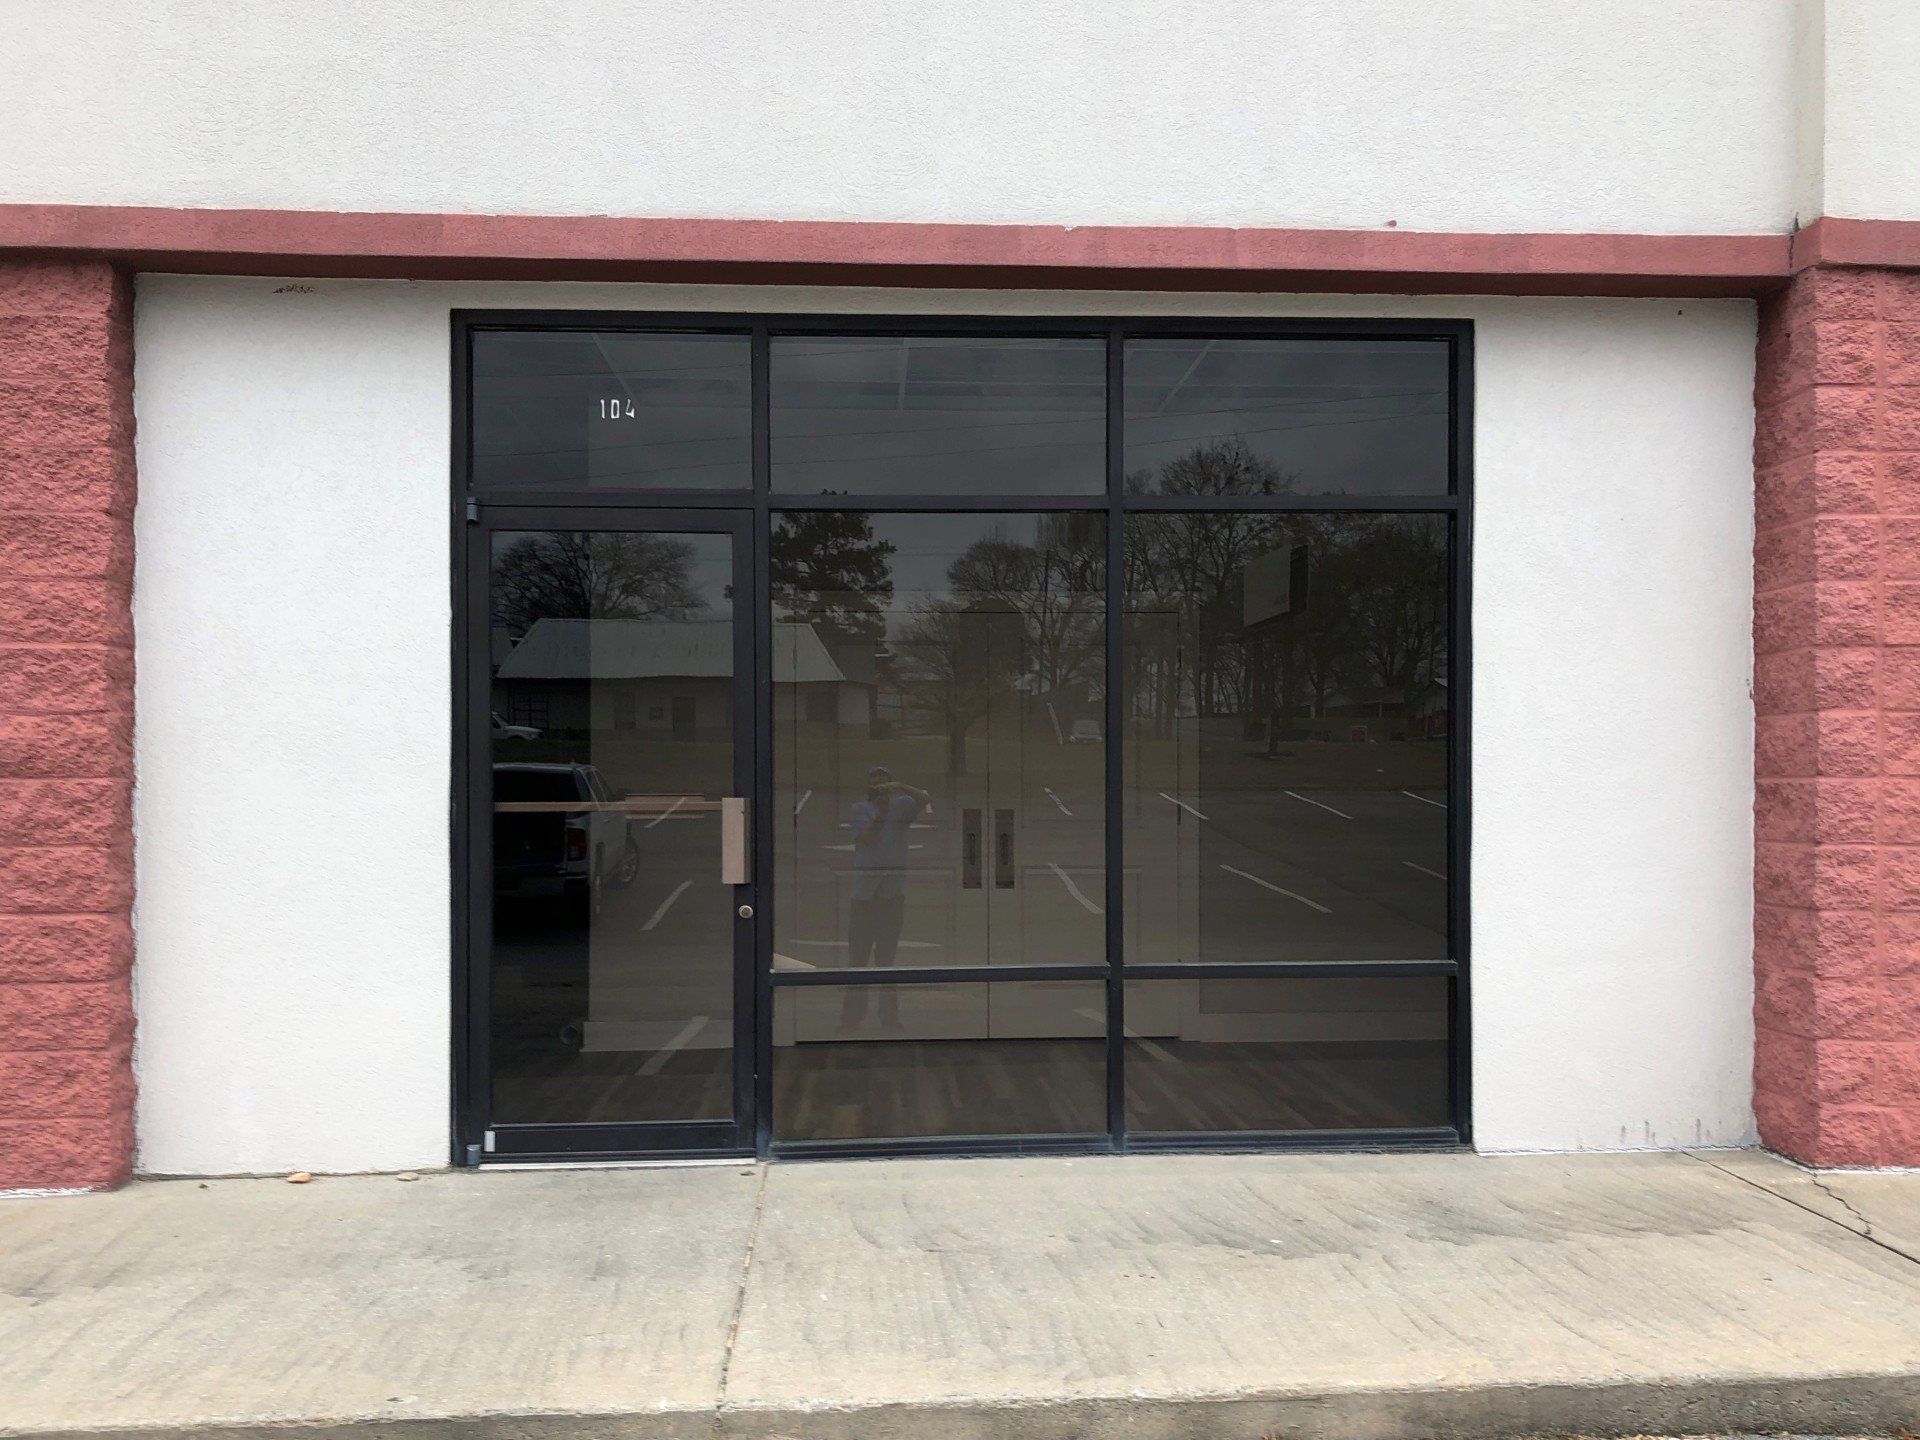 The visibility seen looking in the windows is evident, but the heat was unbearable before SPF Quality Tint was installed to business in Clanton AL on 3/14/2019.